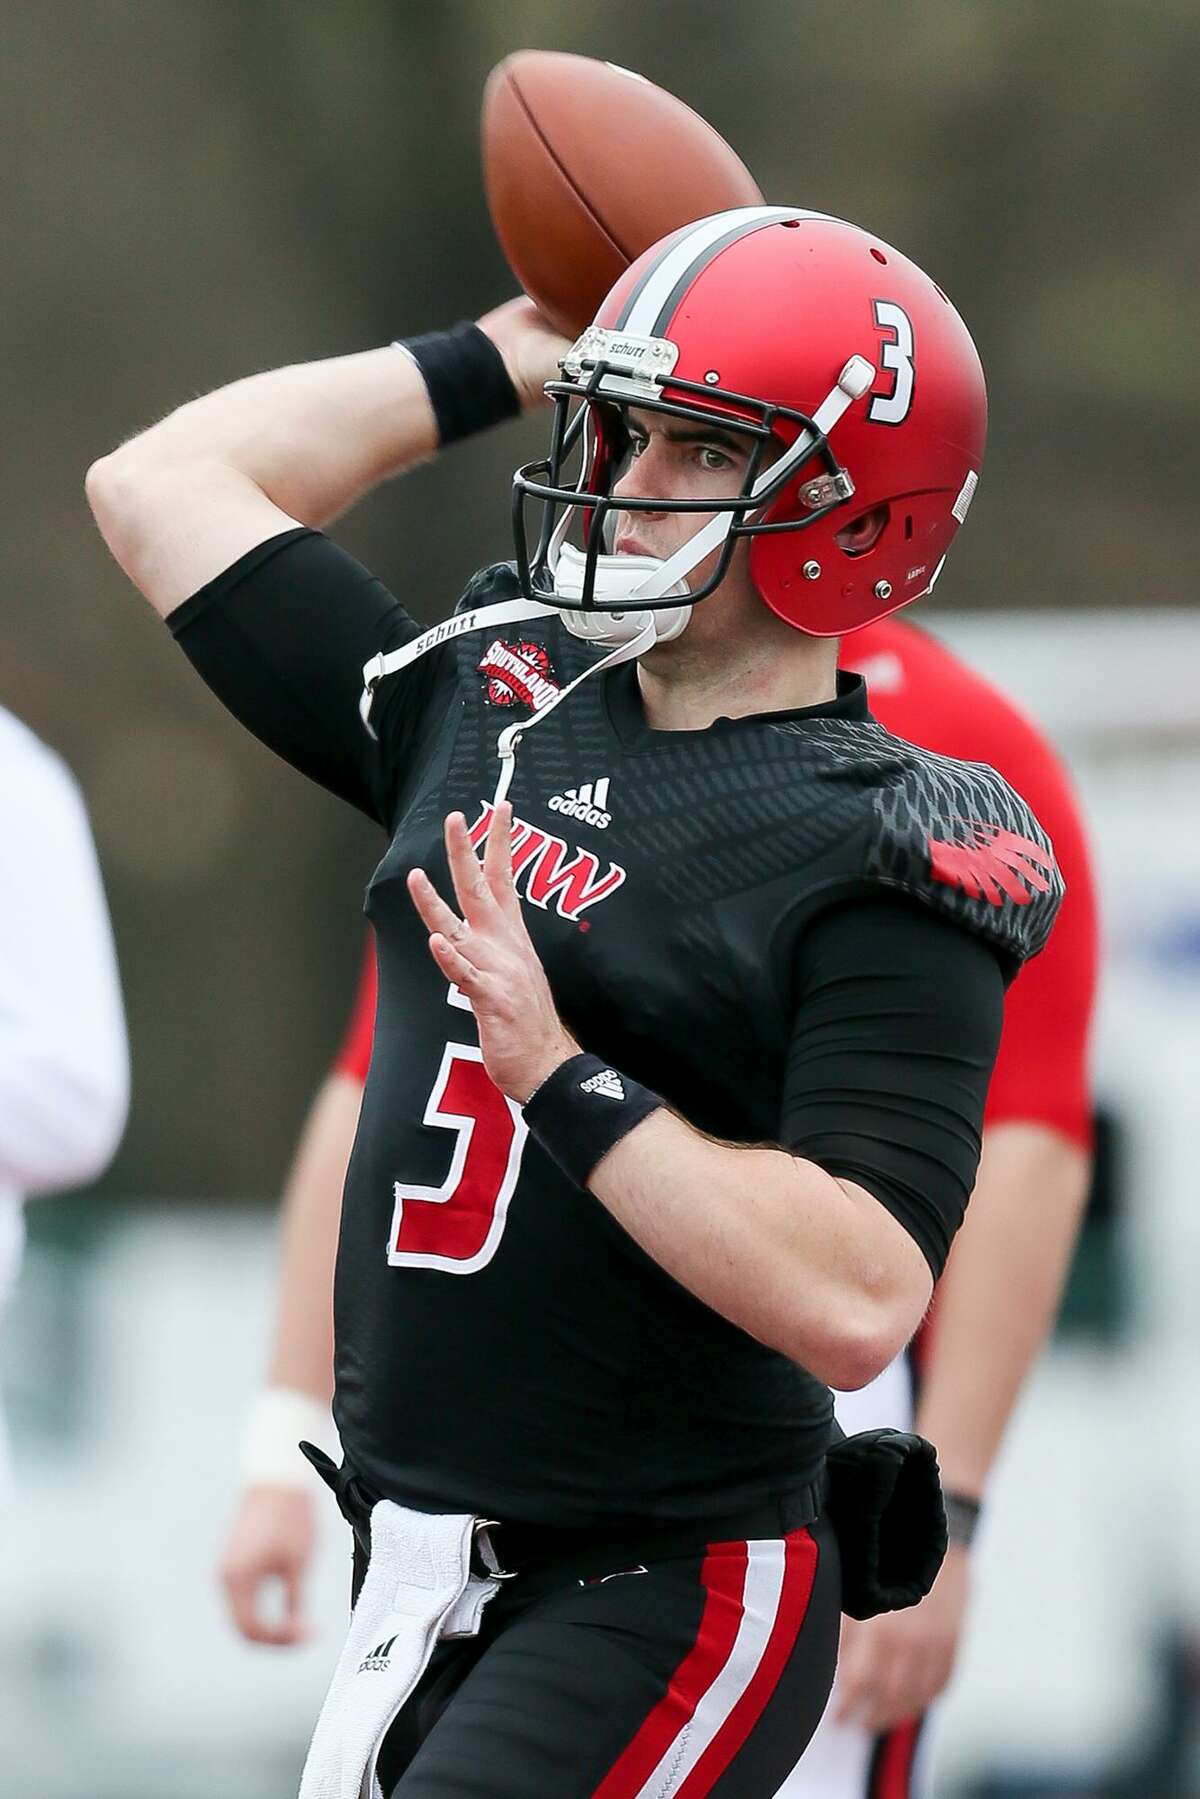 UIW quarterback Sean Brophy warms up prior to the start of the Cardinals' spring football game at Benson Stadium on Saturday, March 2, 2019.